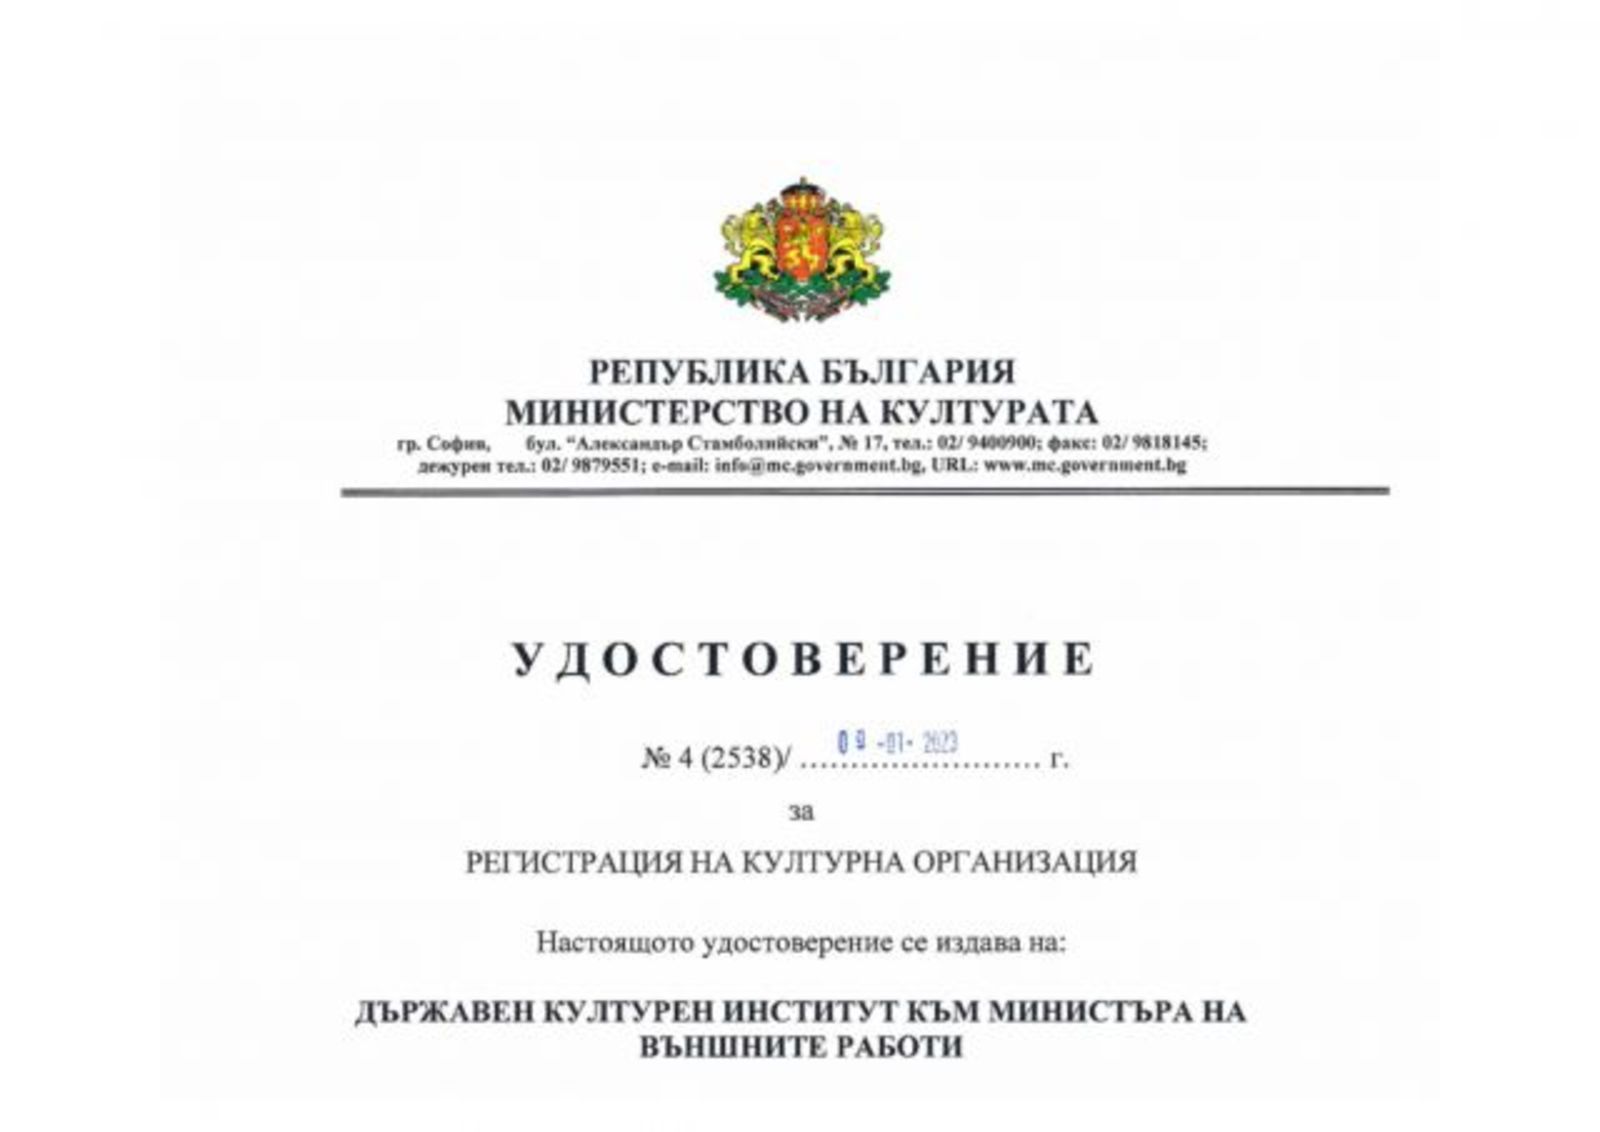  The State Institute for Culture - Officially Registered As A Cultural Organization In The Register Of The Ministry Of Culture